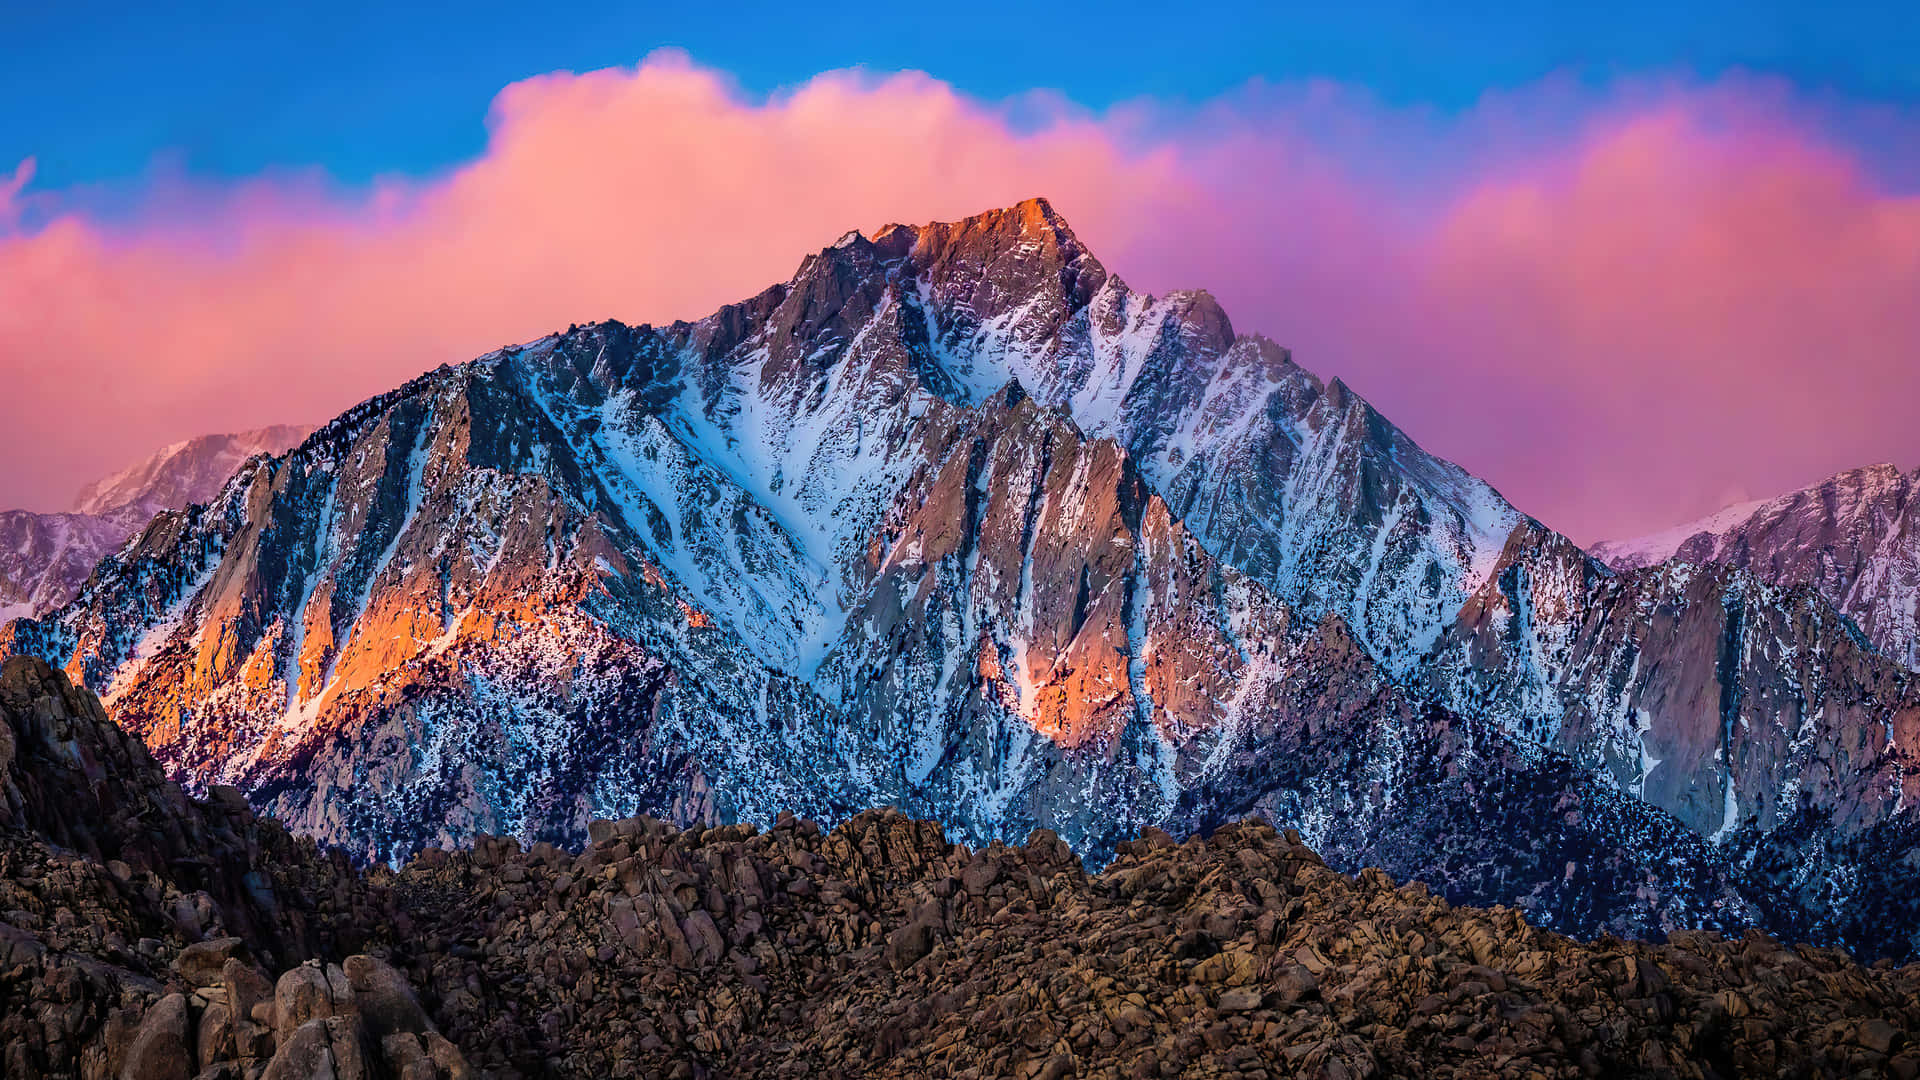 A Mountain Range With A Pink Sky And Snow Wallpaper